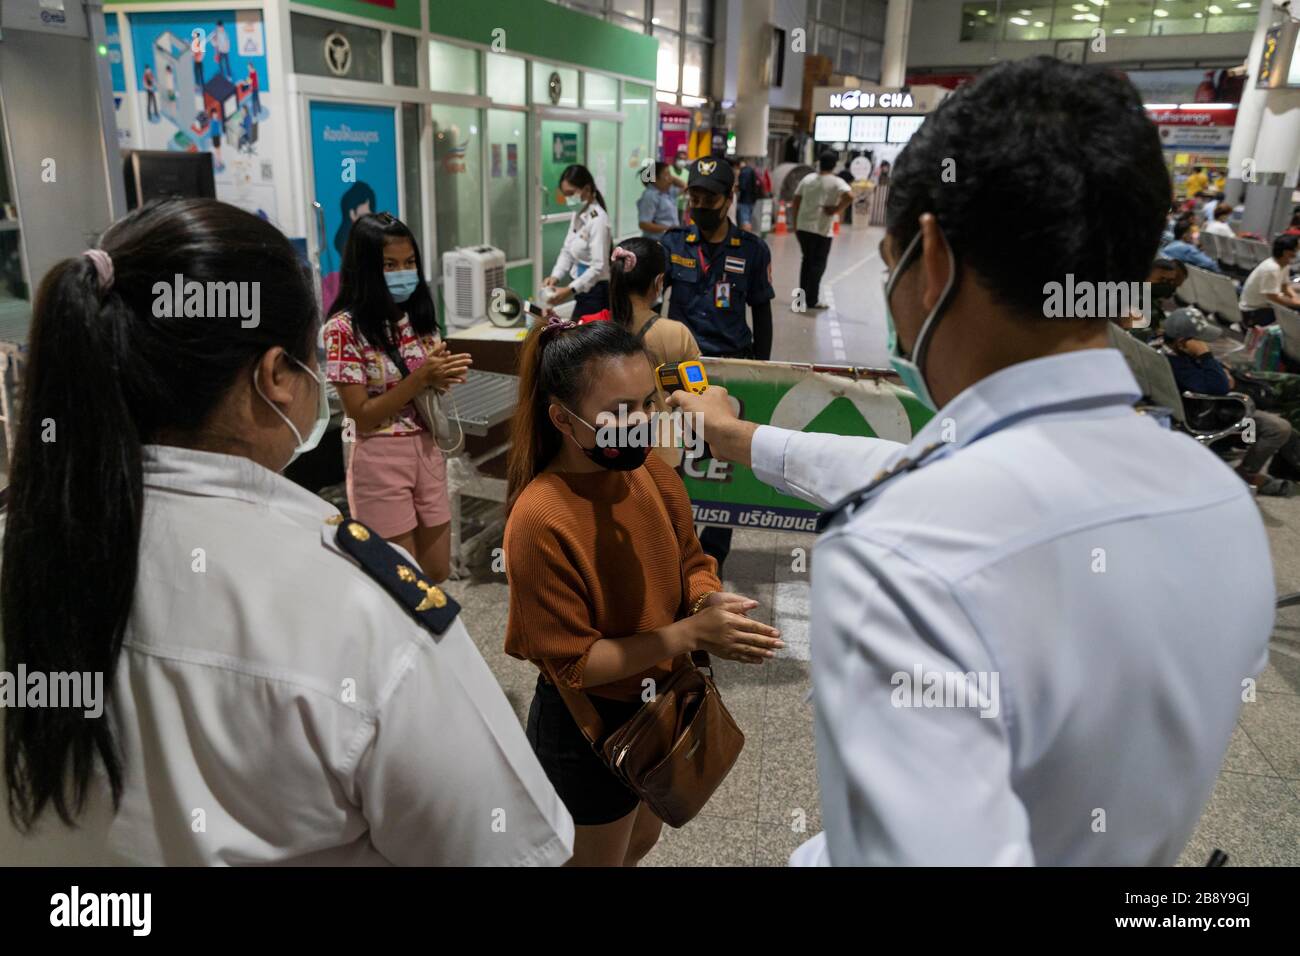 Bangkok, Bangkok, Thailand. 23rd Mar, 2020. A member of the public undergoes a temperature check before entering Bangkok's Mochit bus terminal. The travel hub was filled with thousands of travelers heading back to their home provinces after the city government ordered the mandatory closure of many nonessential businesses on March 22nd, 2020 in an effort to slow the spread of the Covid-19 virus. Large portions of the capital's workforce live paycheck to pay check, making staying in the city financially impossible due to their sudden lack of employment. Credit: ZUMA Press, Inc./Alamy Live News Stock Photo